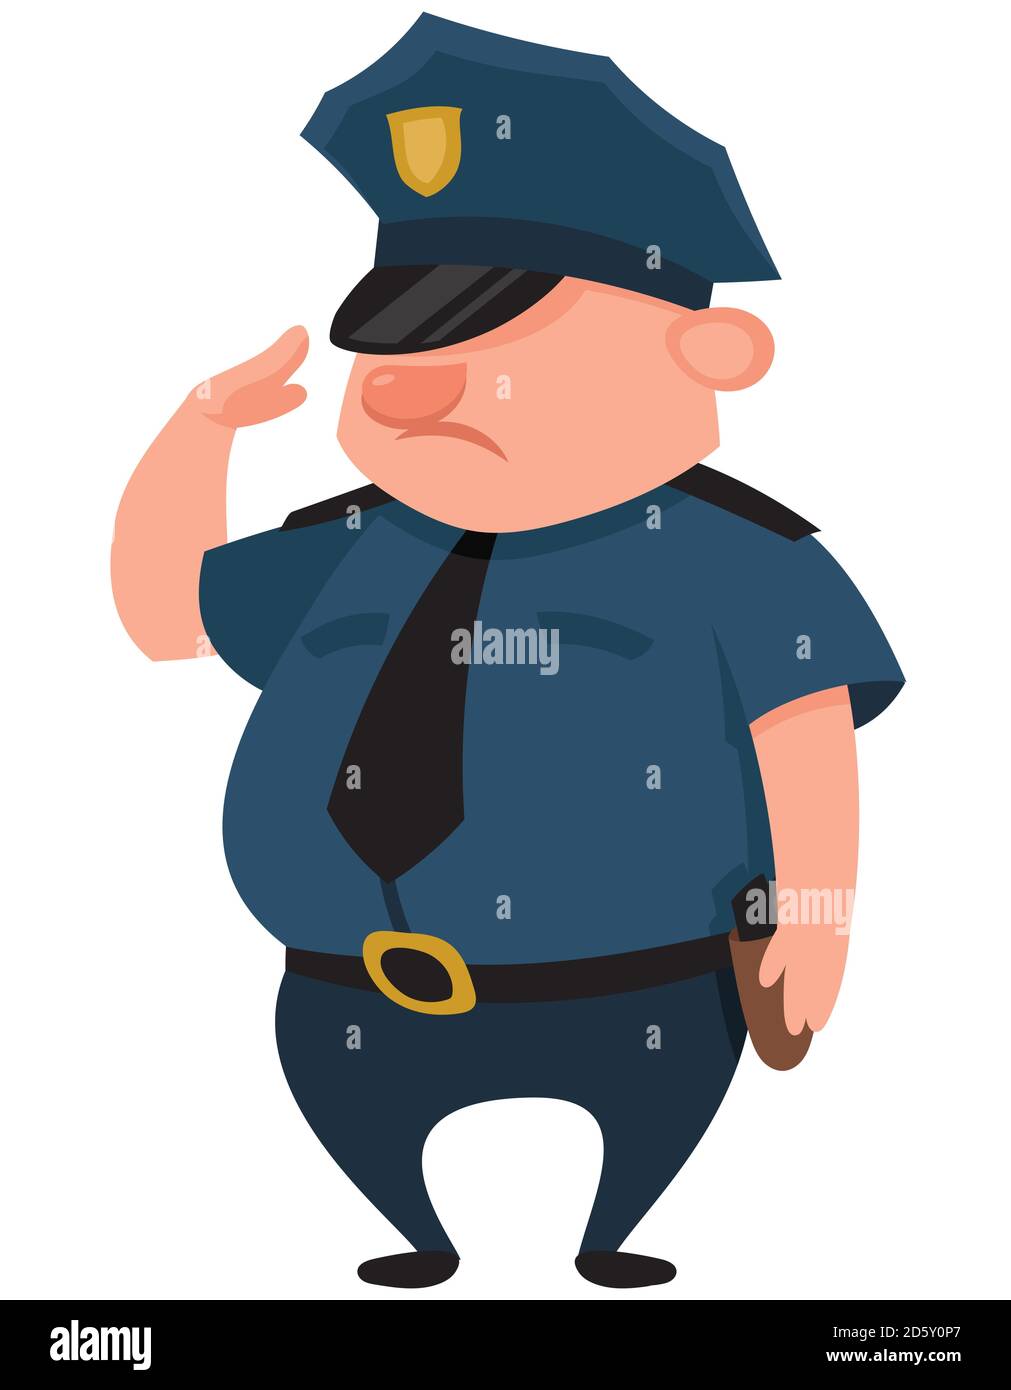 Police officer giving salute. Male character in cartoon style. Stock Vector